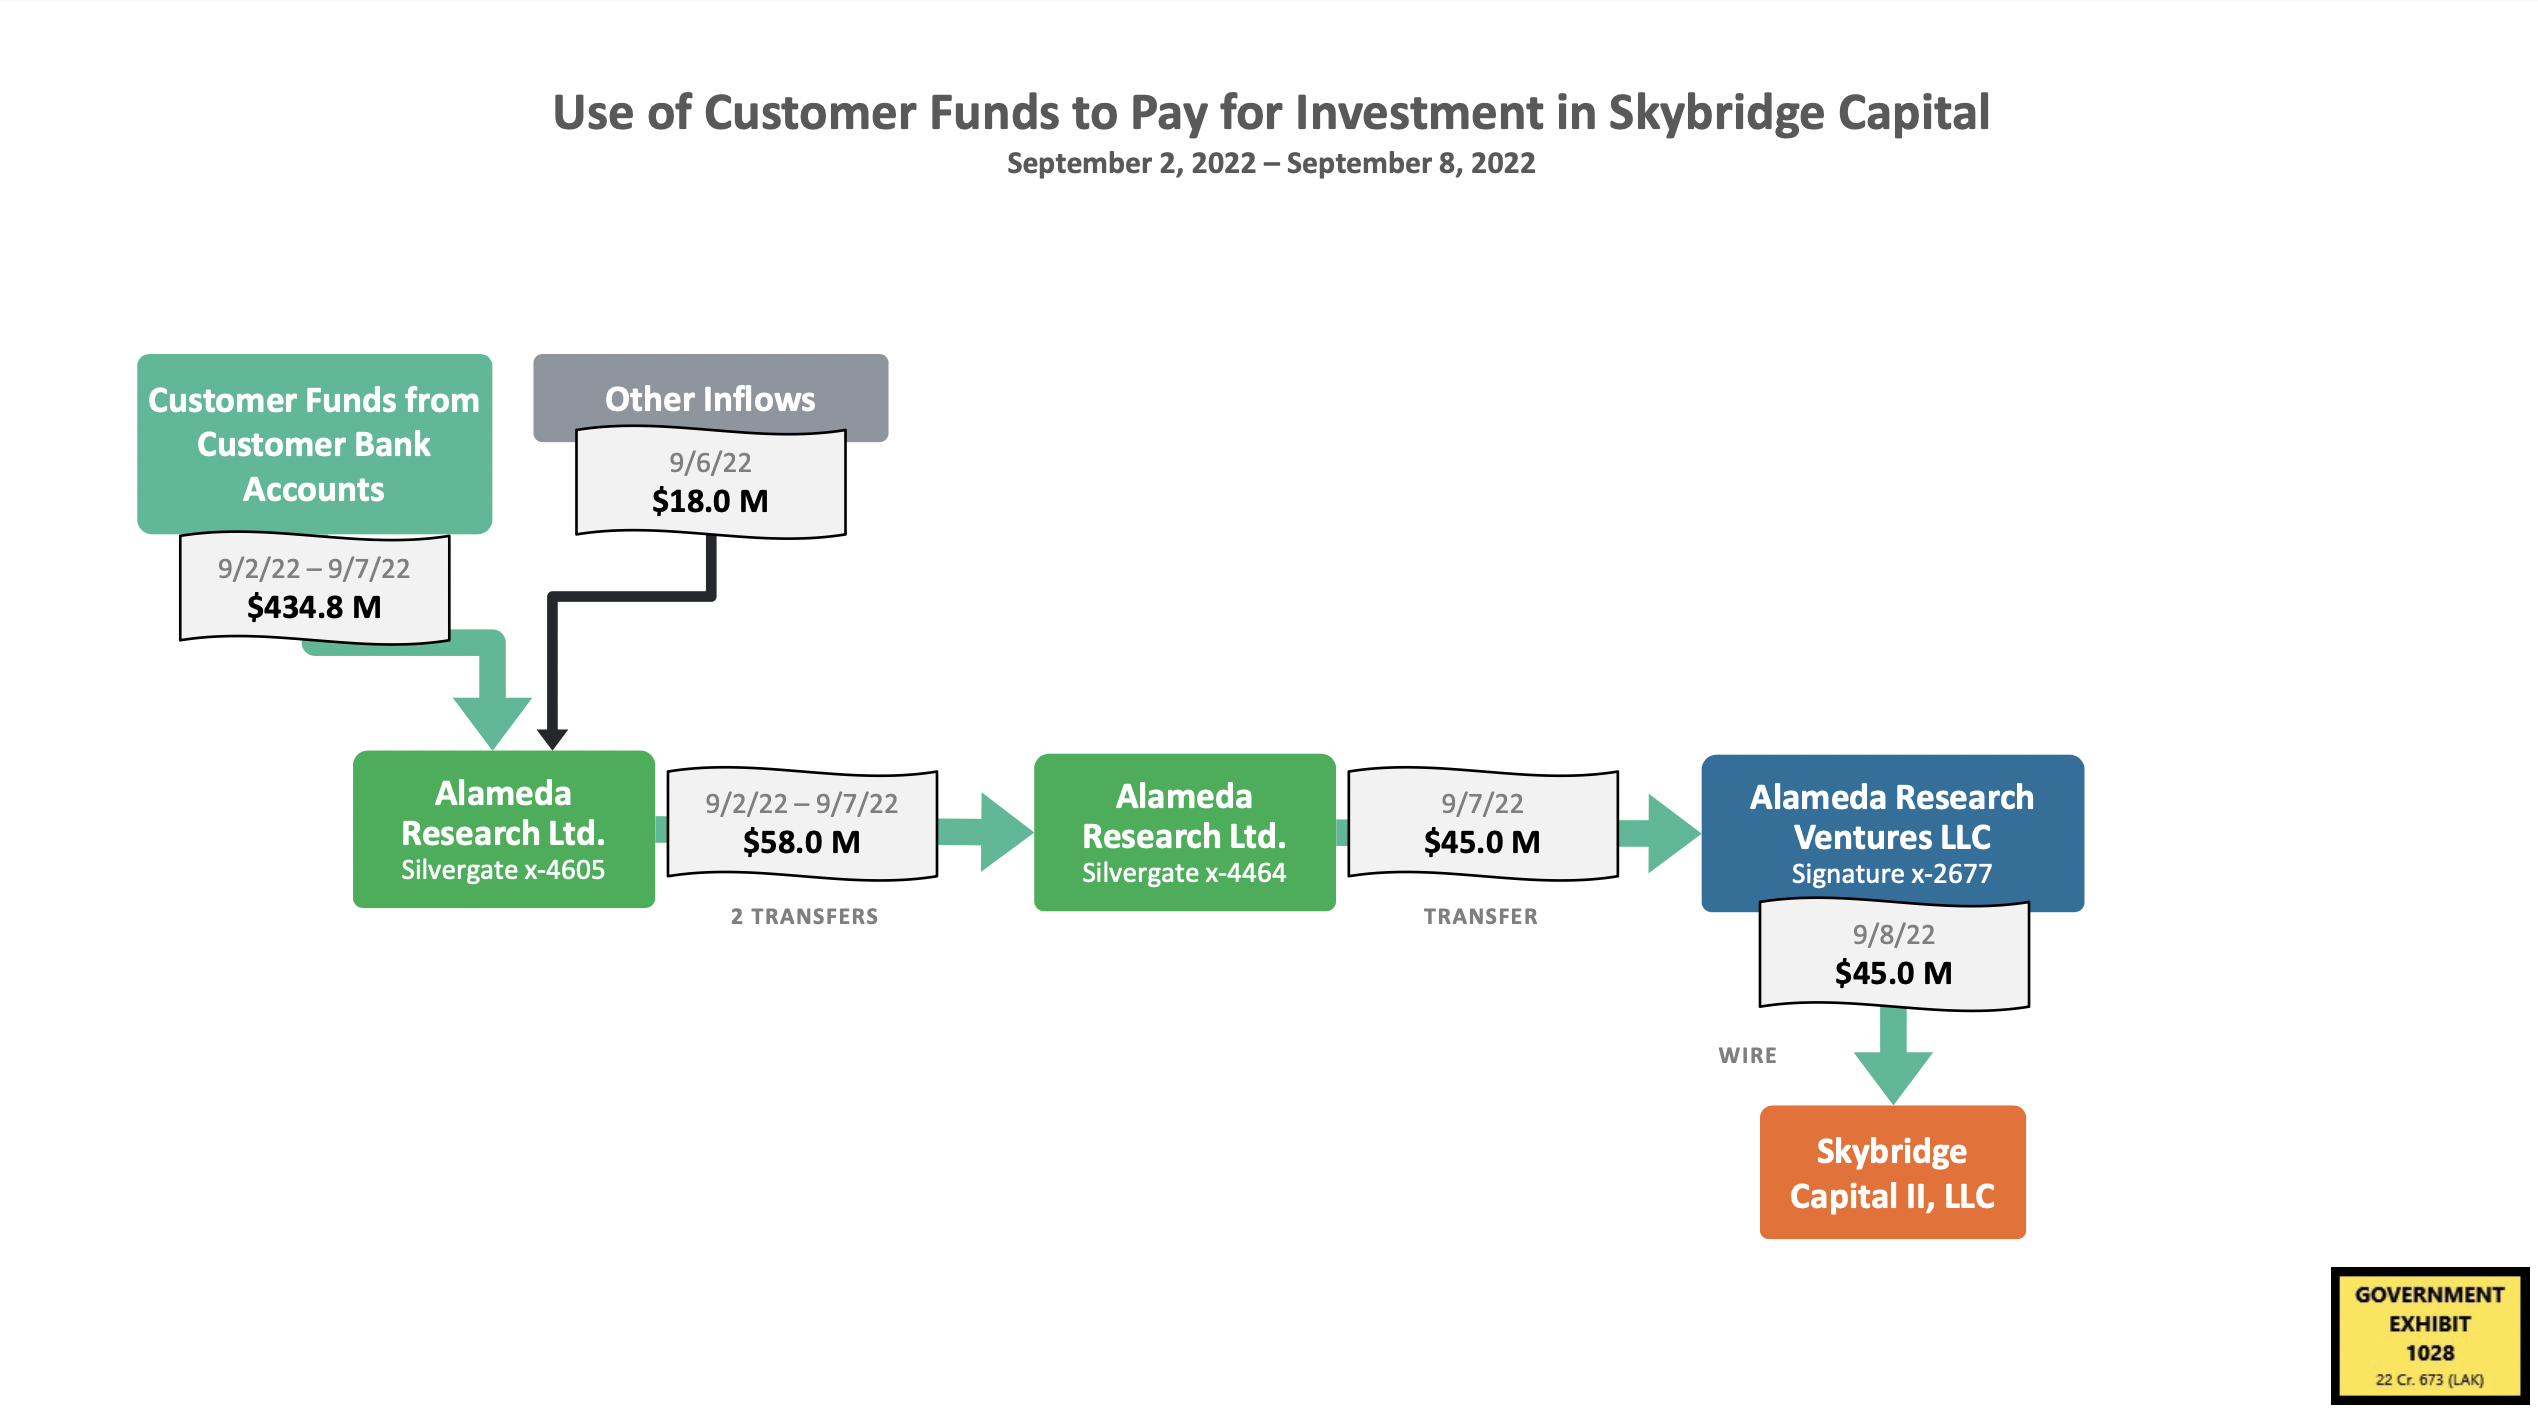 A slide shown to the jury during Professor Peter Easton's testimony revealed his analysis of the flow of funds to invest in SkyBridge Capital.